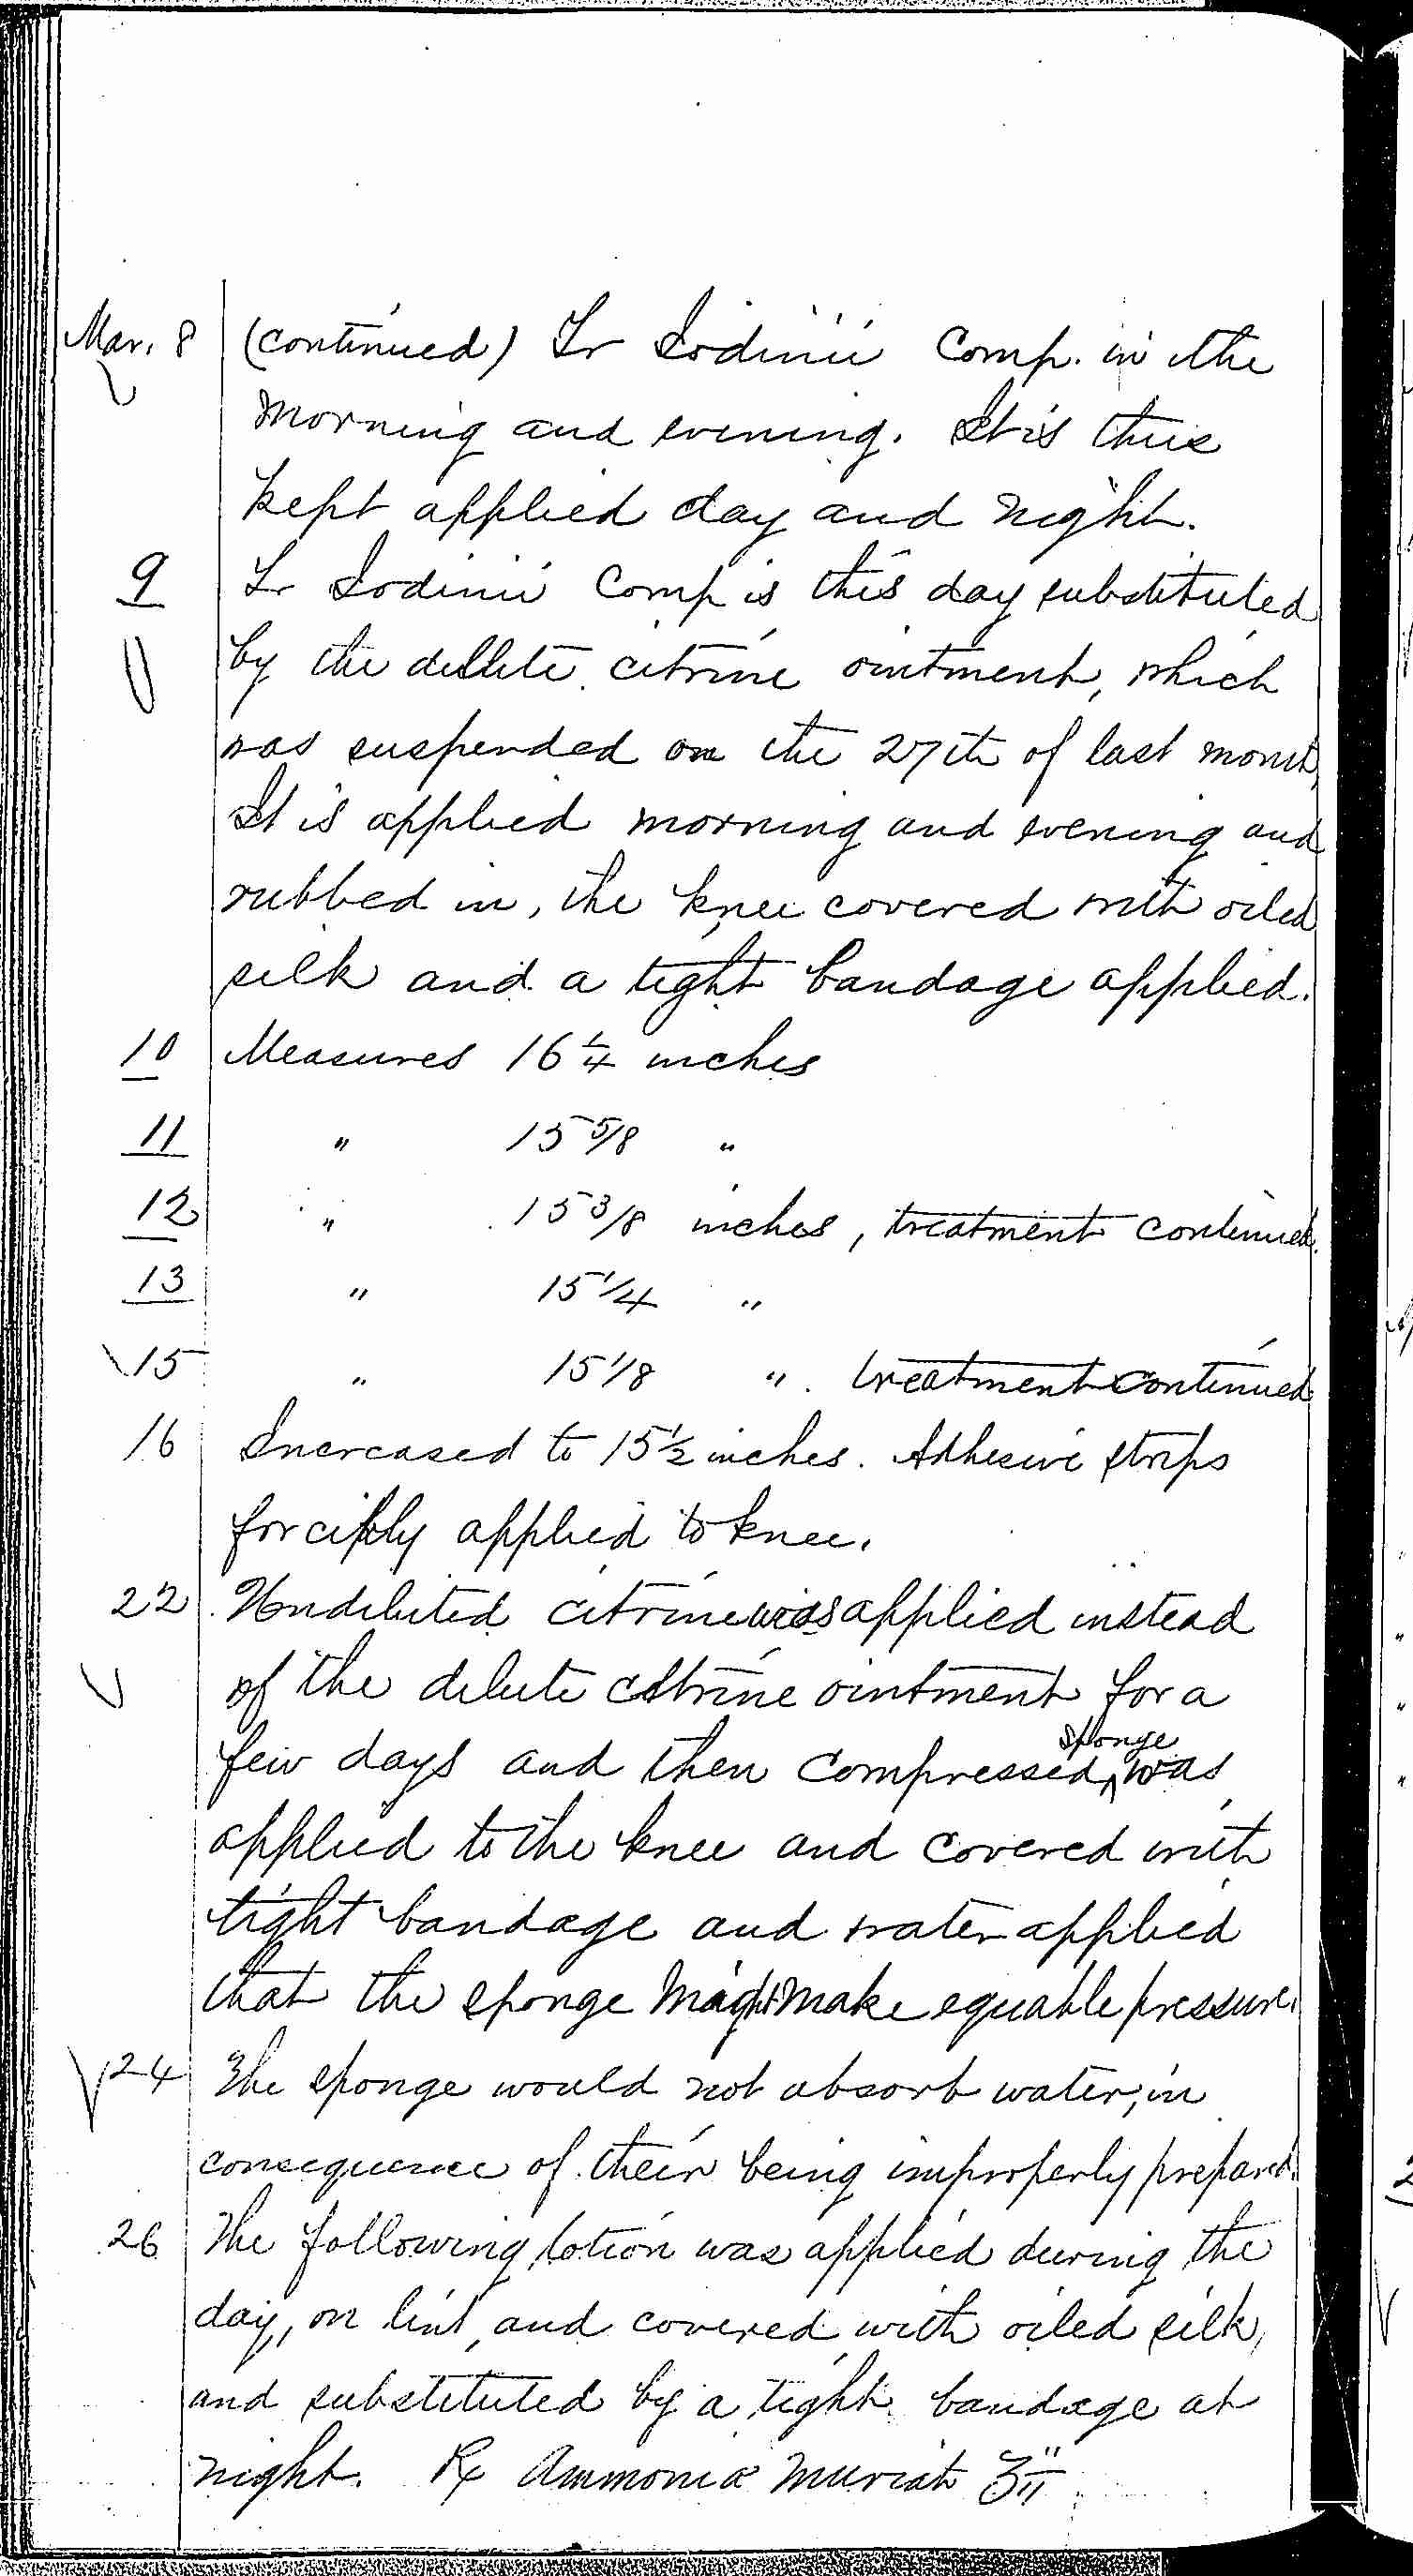 Entry for Henry James (page 4 of 8) in the log Hospital Tickets and Case Papers - Naval Hospital - Washington, D.C. - 1868-69